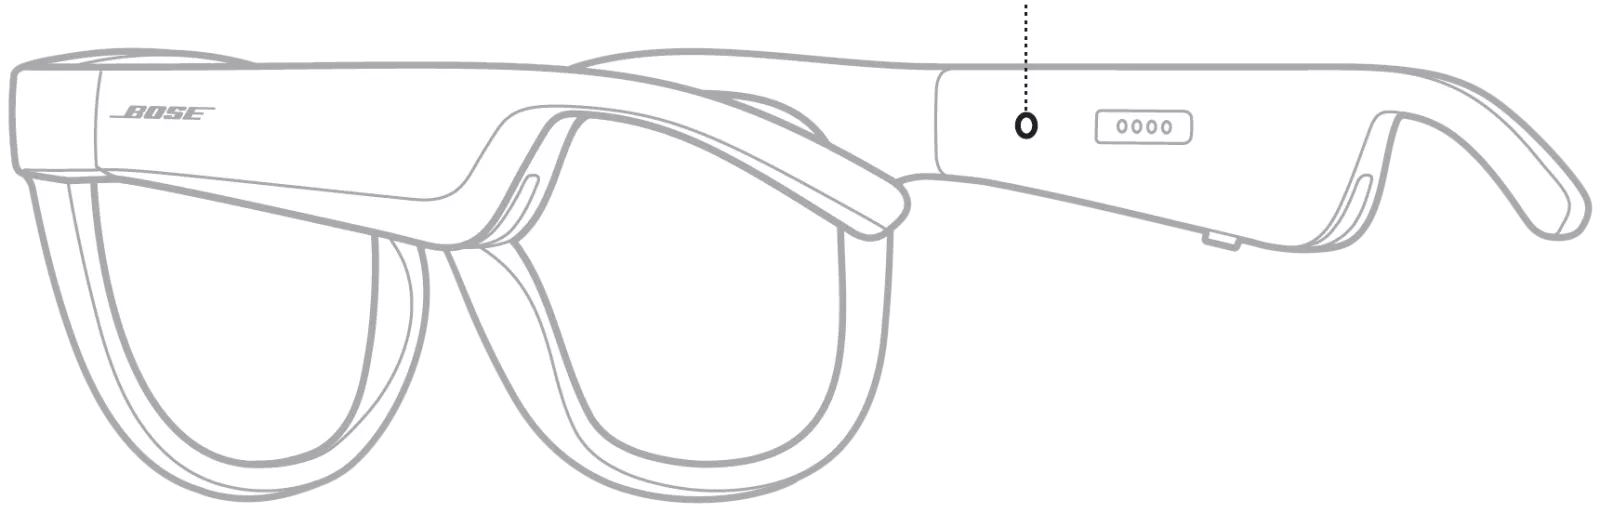 Status light shown on the inside of the right arm of the glasses